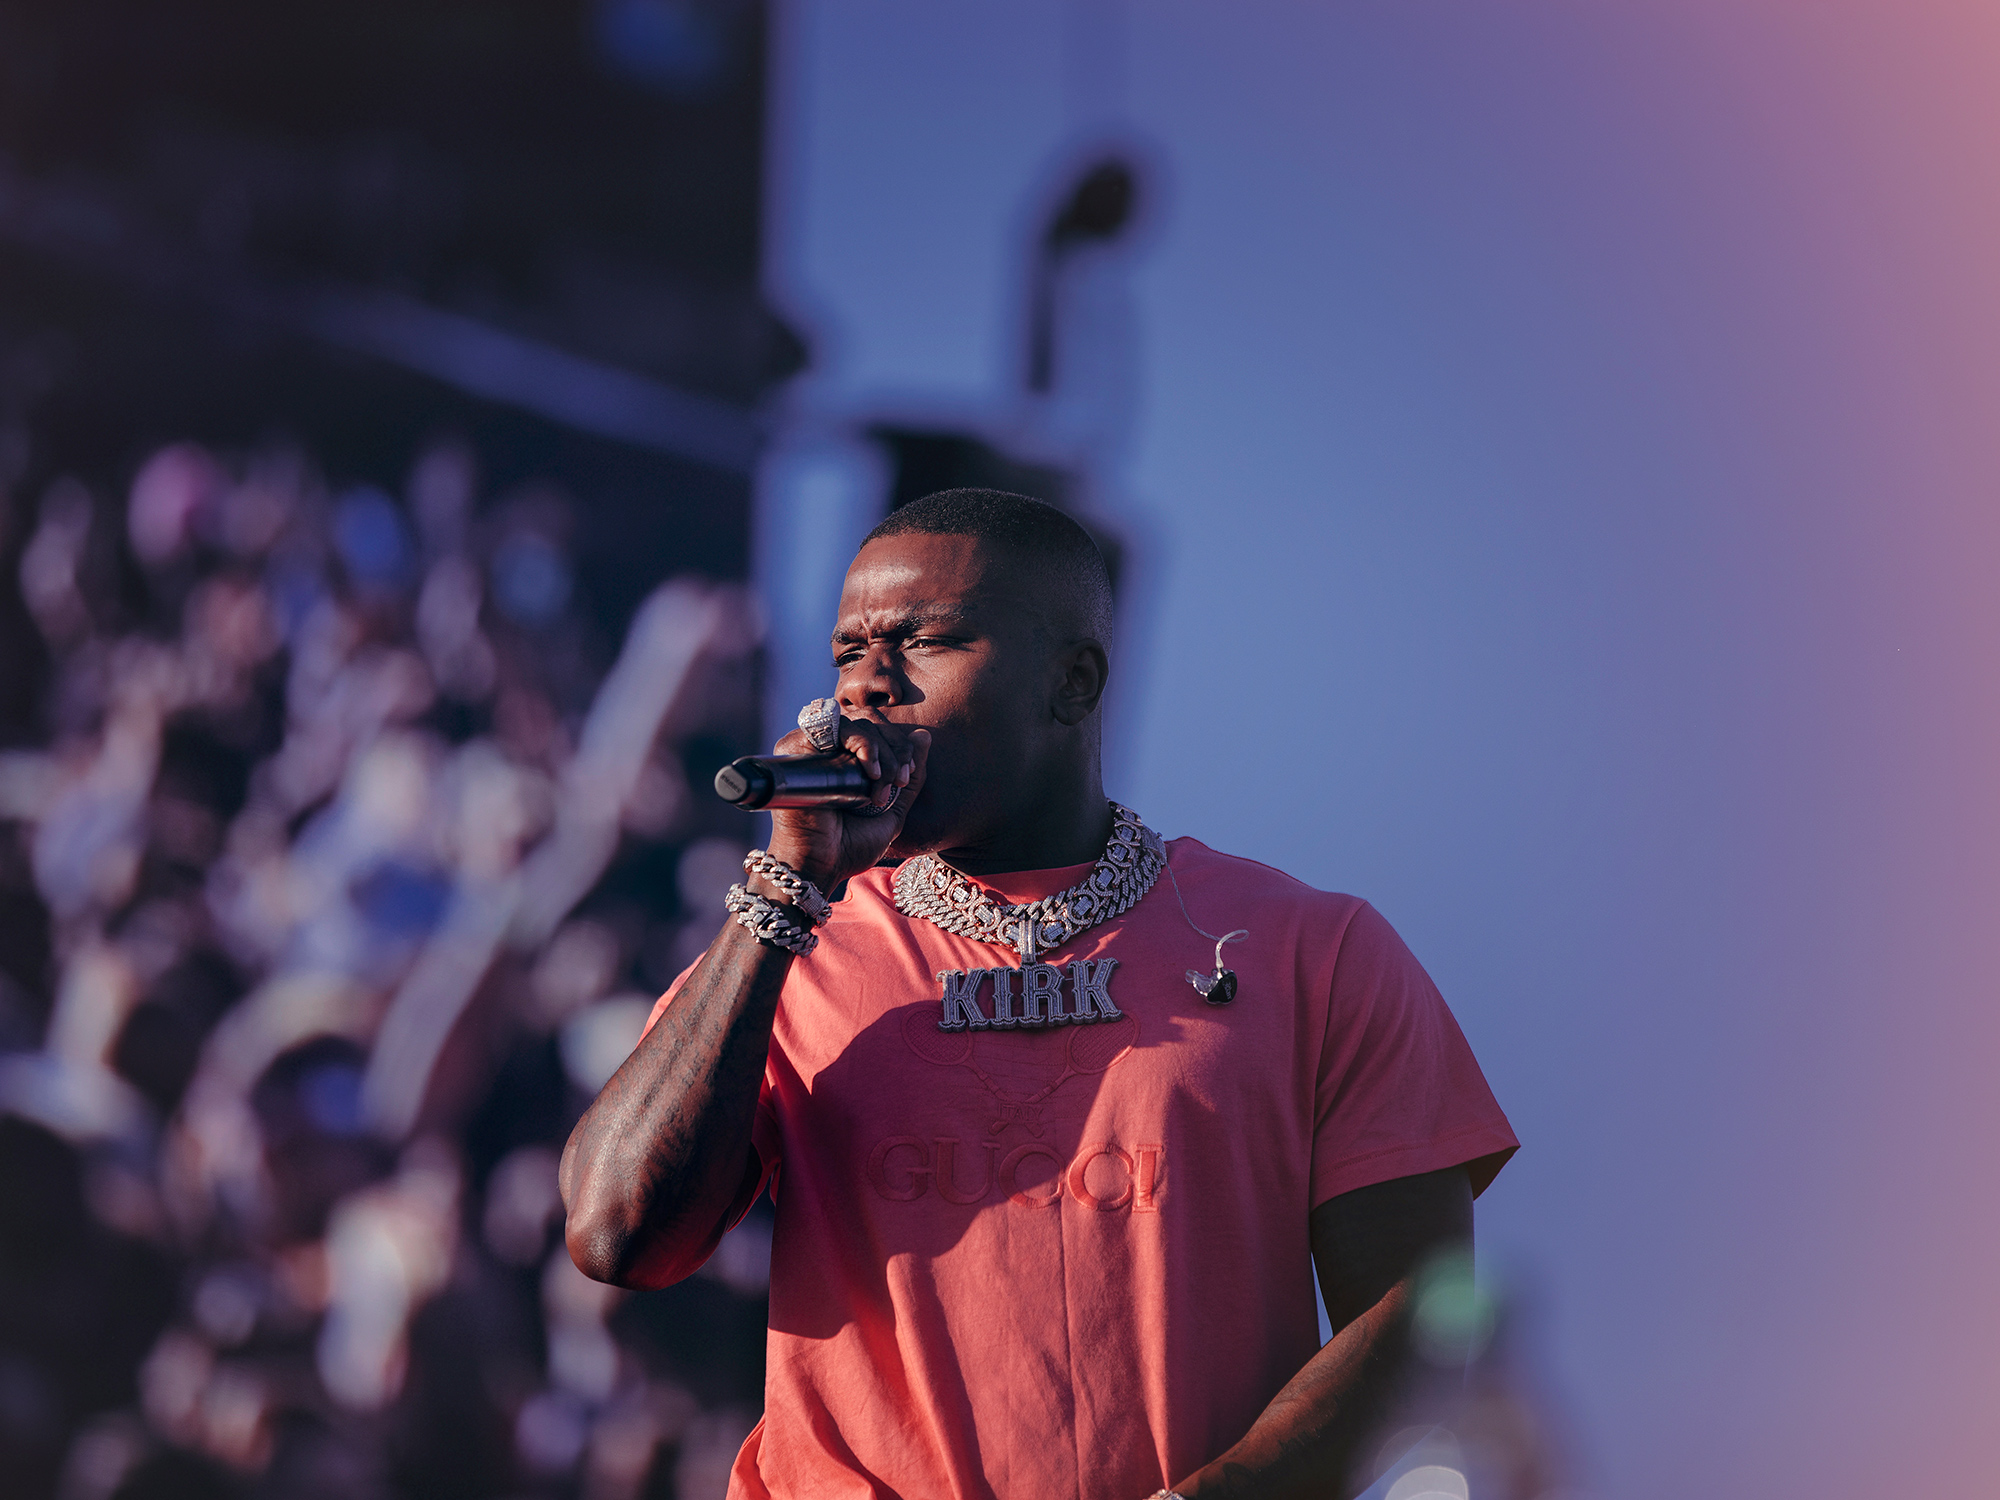 Da Baby live at the 2019 Astroworld Festival in Houston, Texas, photographed by music photographer, Todd Spoth.